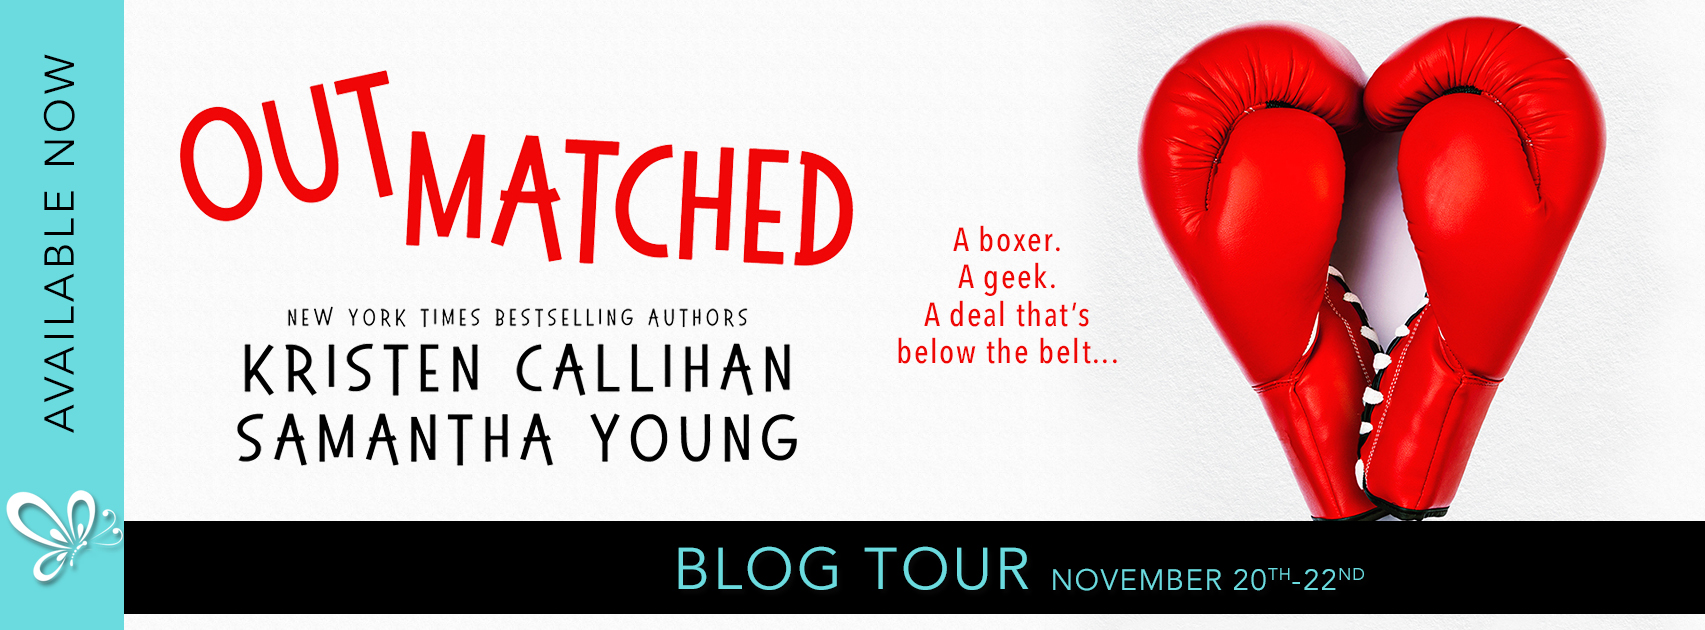 Blog Tour Review with Excerpt:  Outmatched by Kristen Callihan and Samantha Young